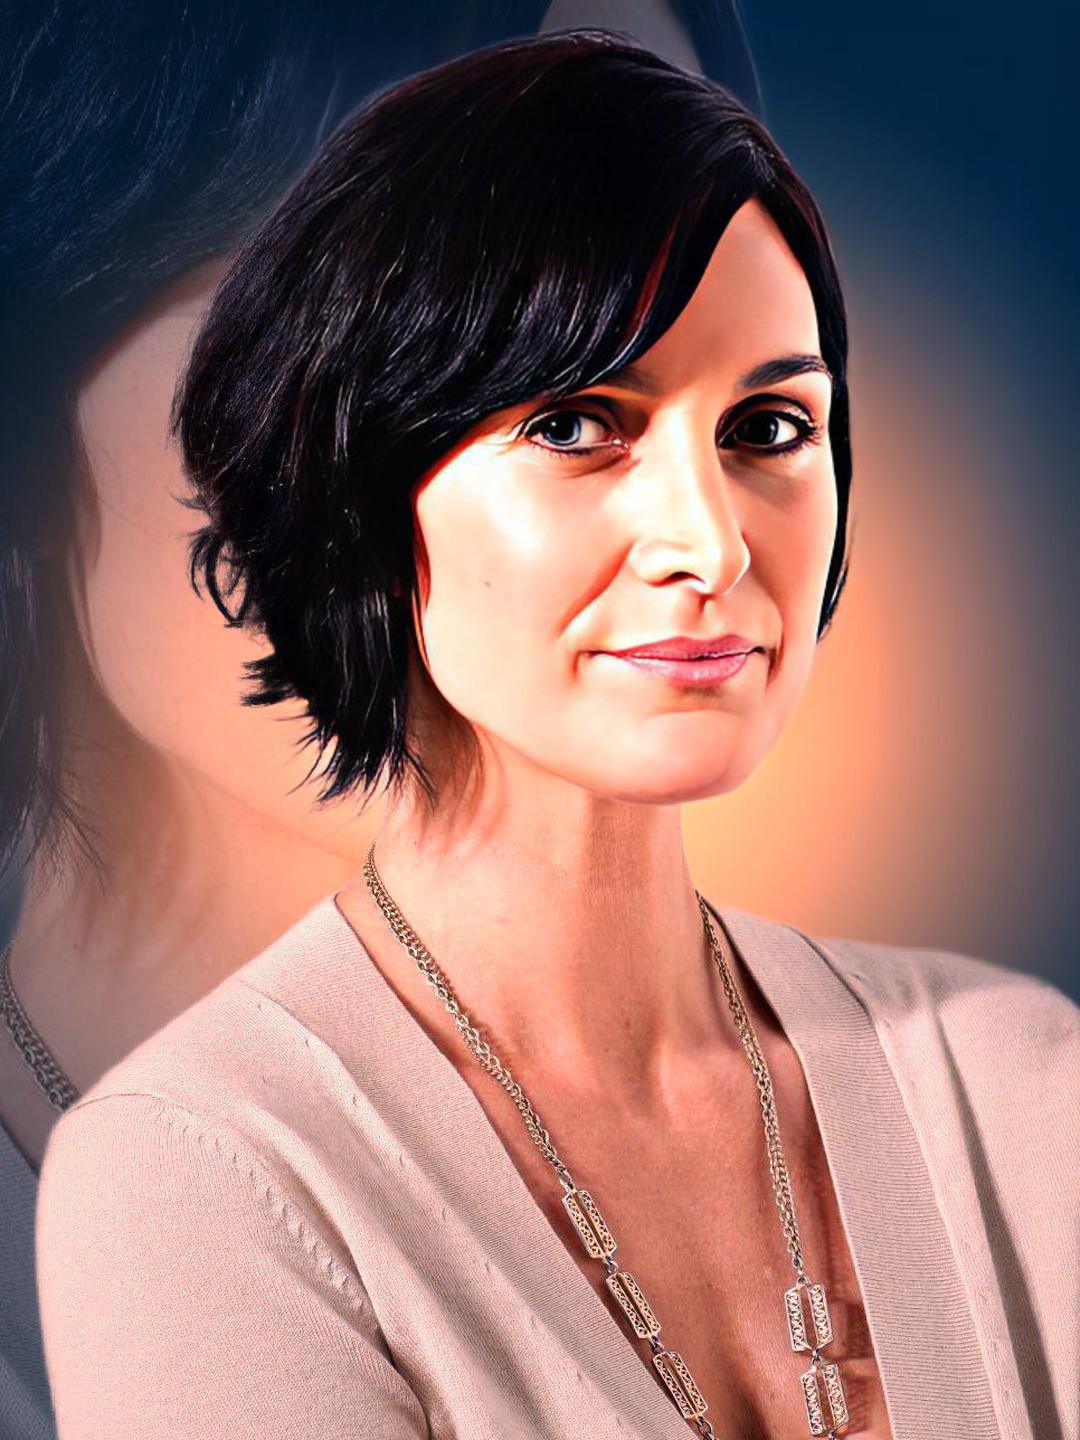 Carrie-Anne Moss - Celeb ART - Beautiful Artworks of Celebrities,  Footballers, Politicians and Famous People in World | OpenSea